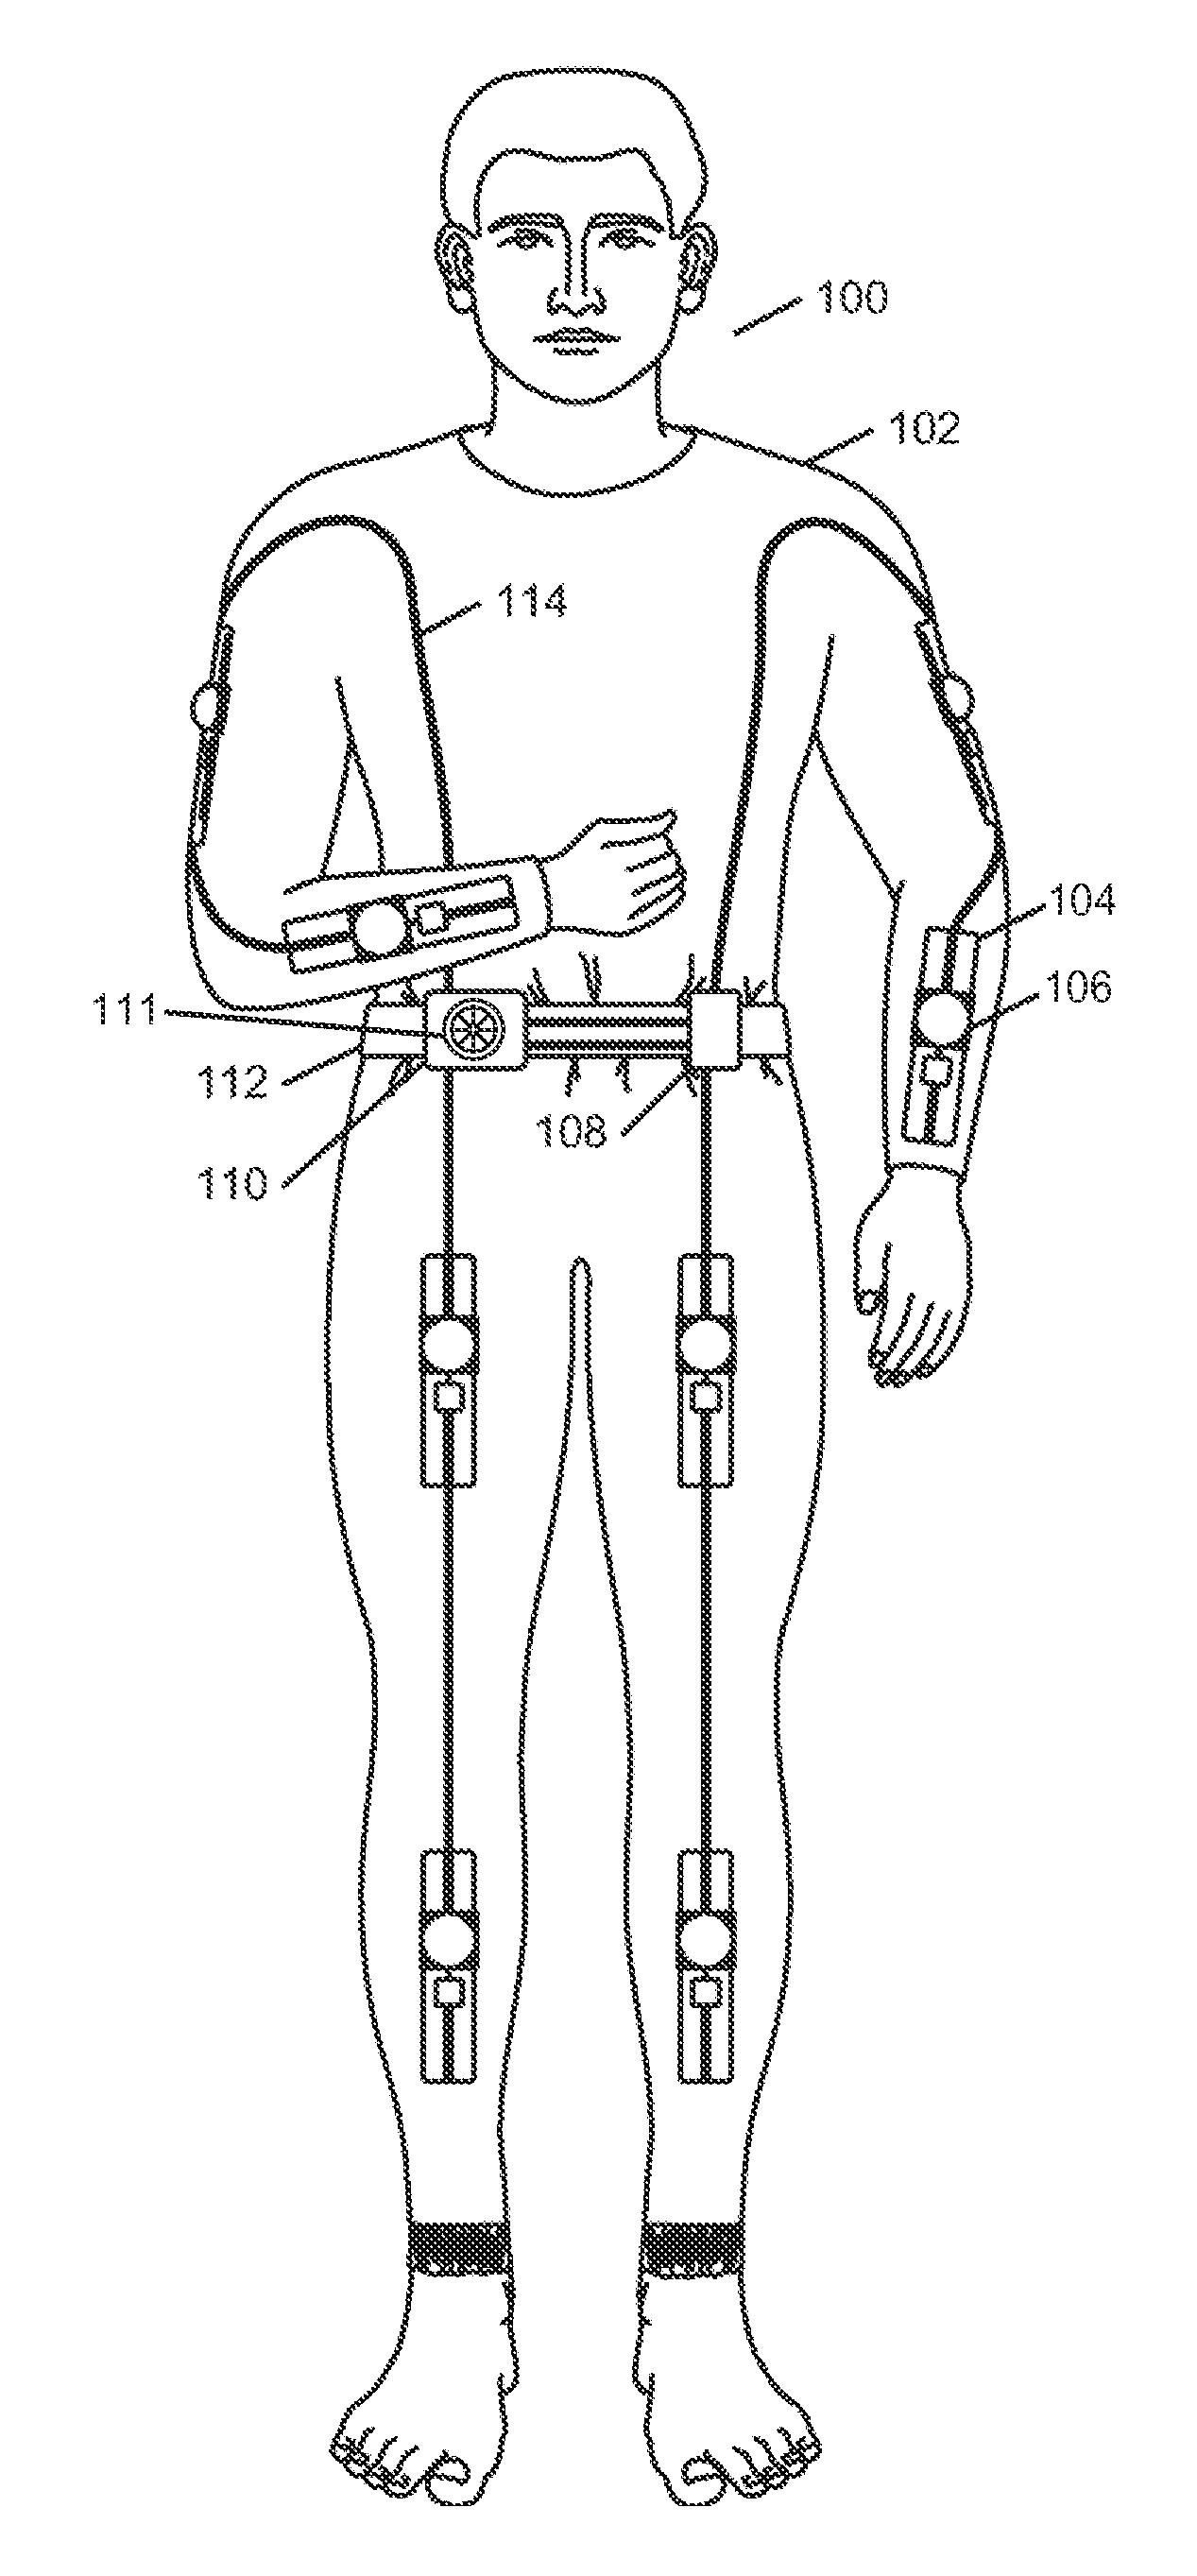 Exoskeleton suit for adaptive resistance to movement